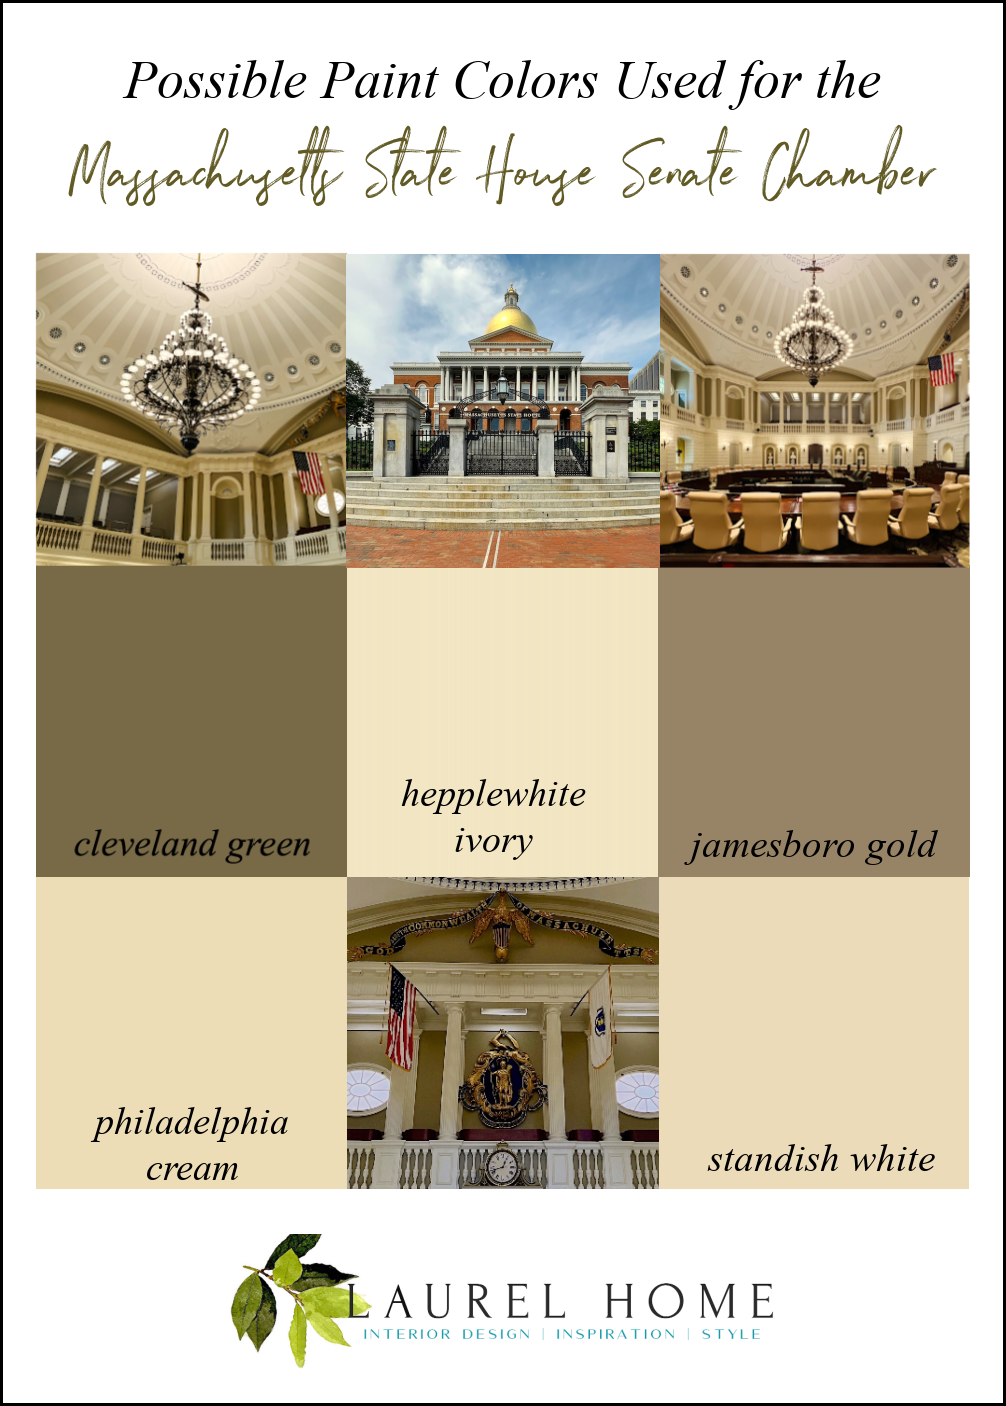 possible paint colors used for the Massachusetts State House Senate Chamber